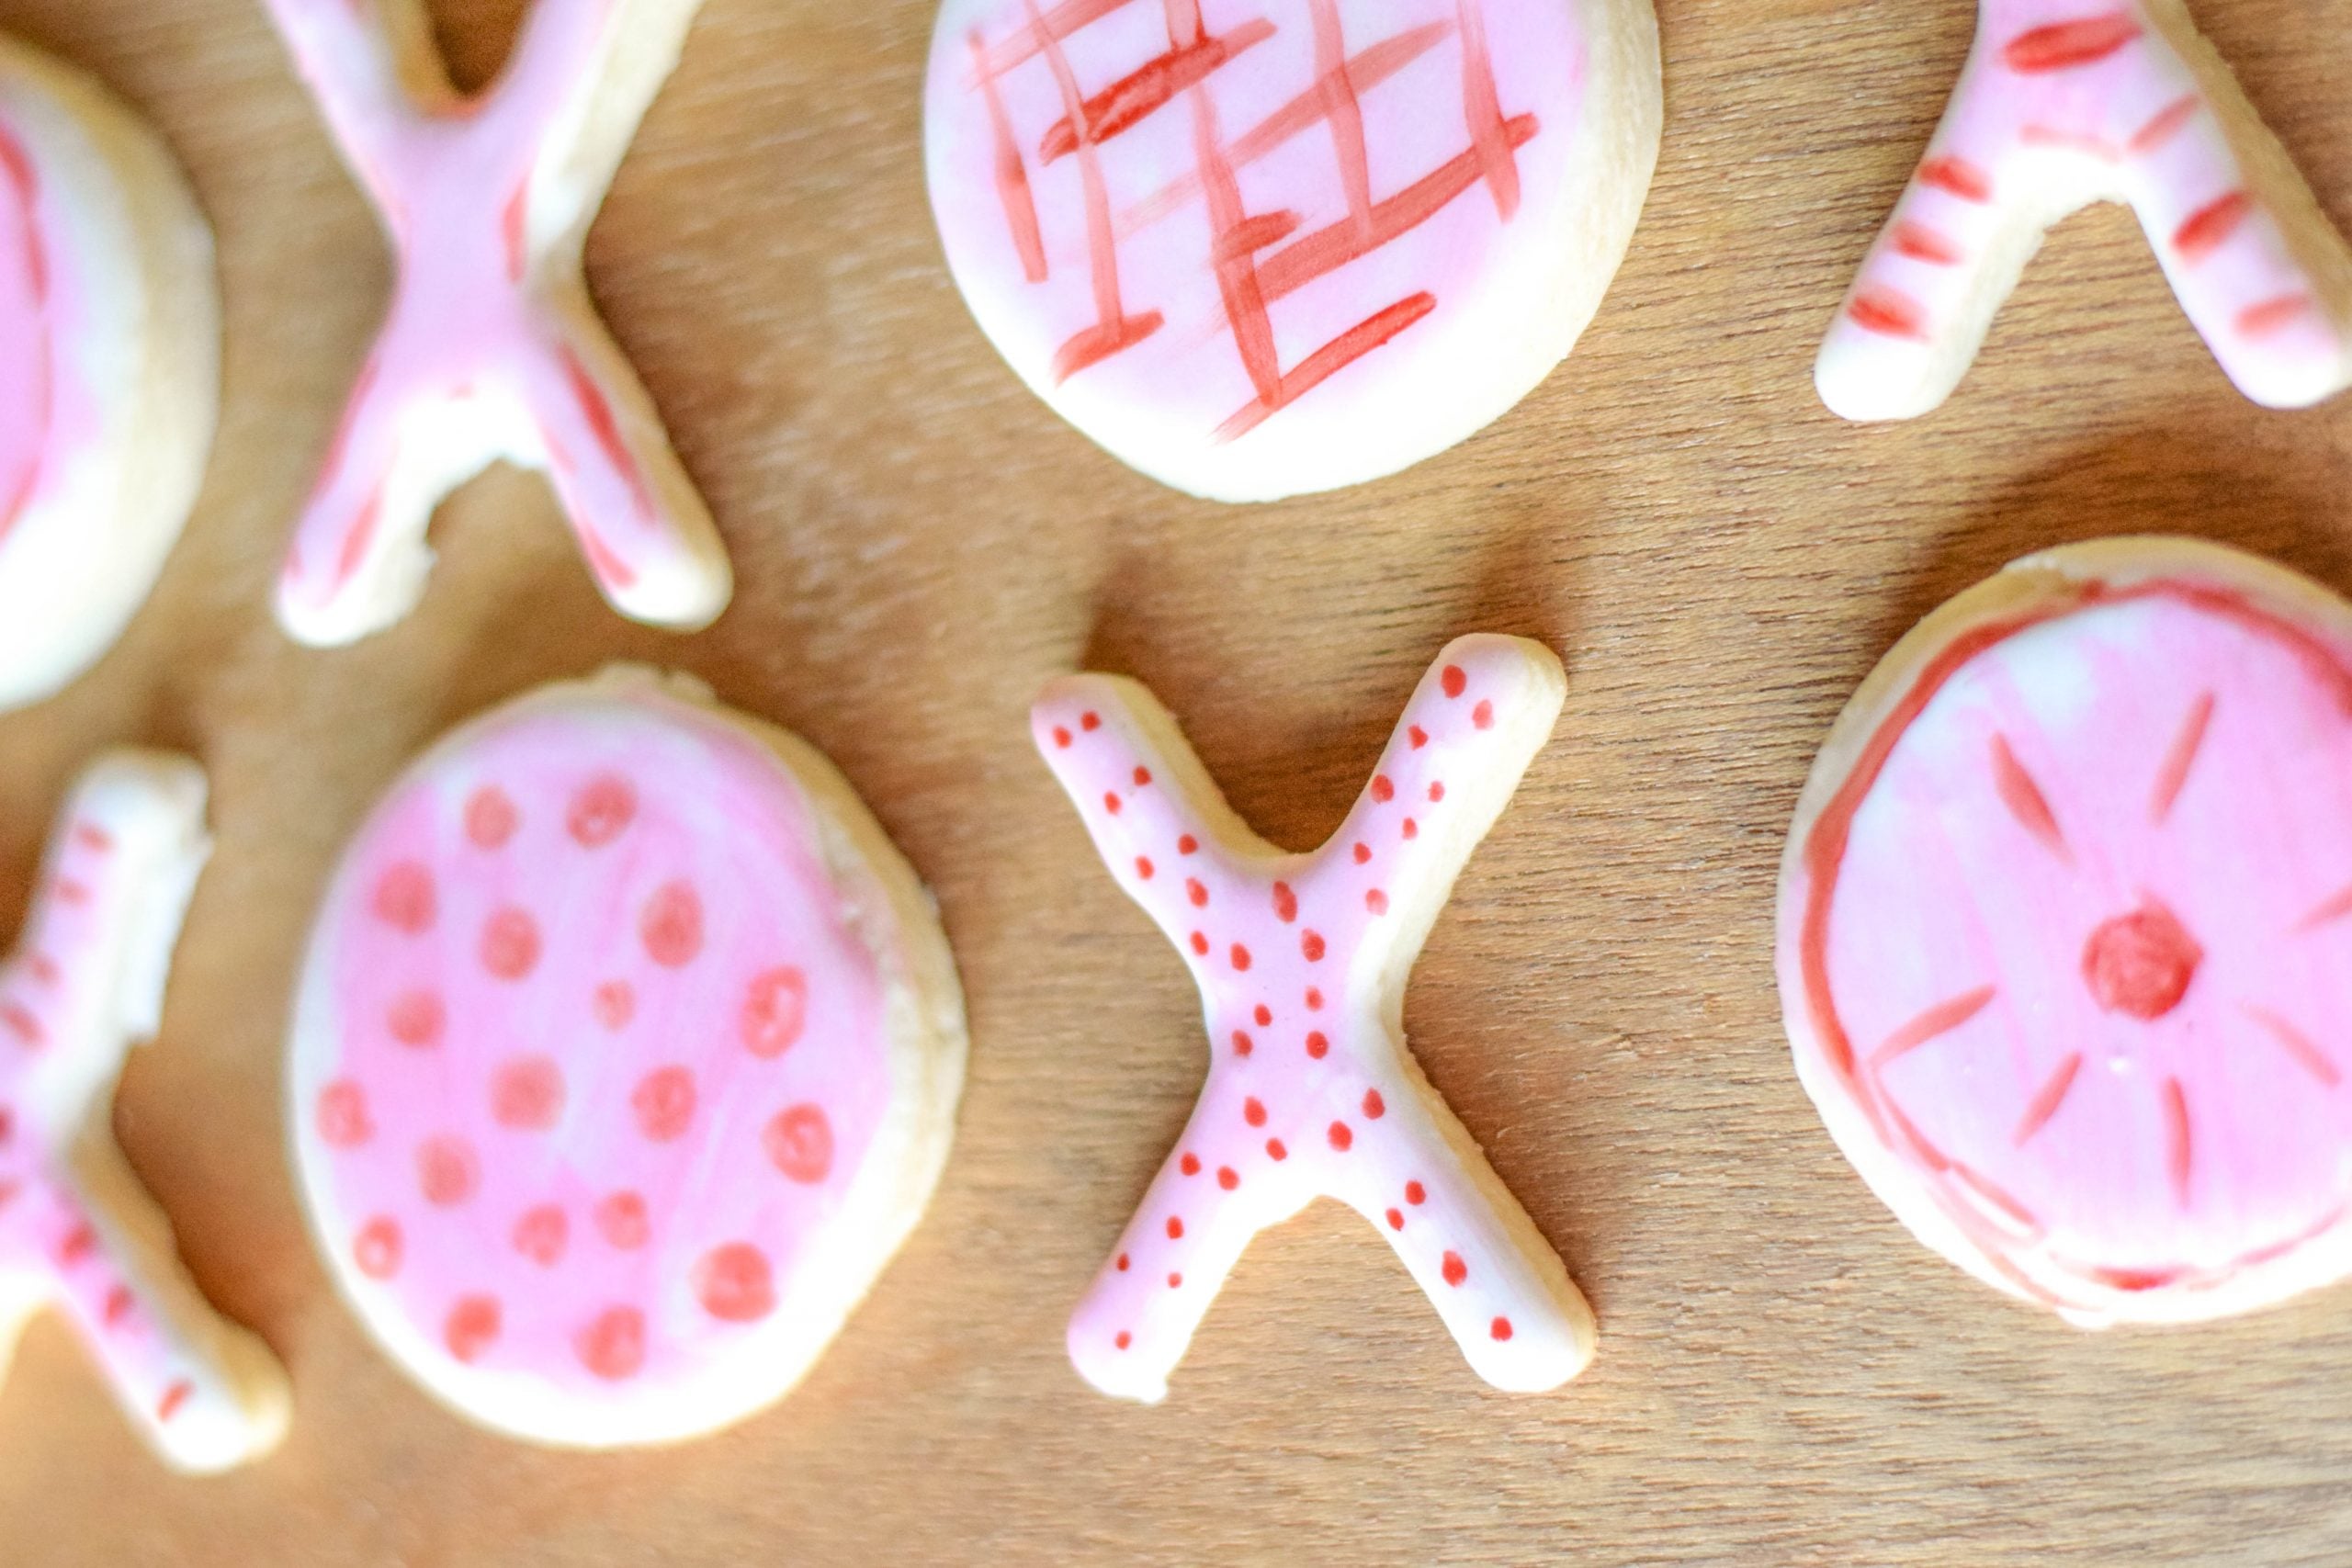 XOXO Painted Sugar Cookies For Valentine's Day - Delicious hand painted sugar cookies that come together easily and will impress all your friends! | XOXO Cookies - Painted Sugar Cookies - Hand Painted Sugar Cookies - Valentine's Day Cookies - Paint Your Own Cookie